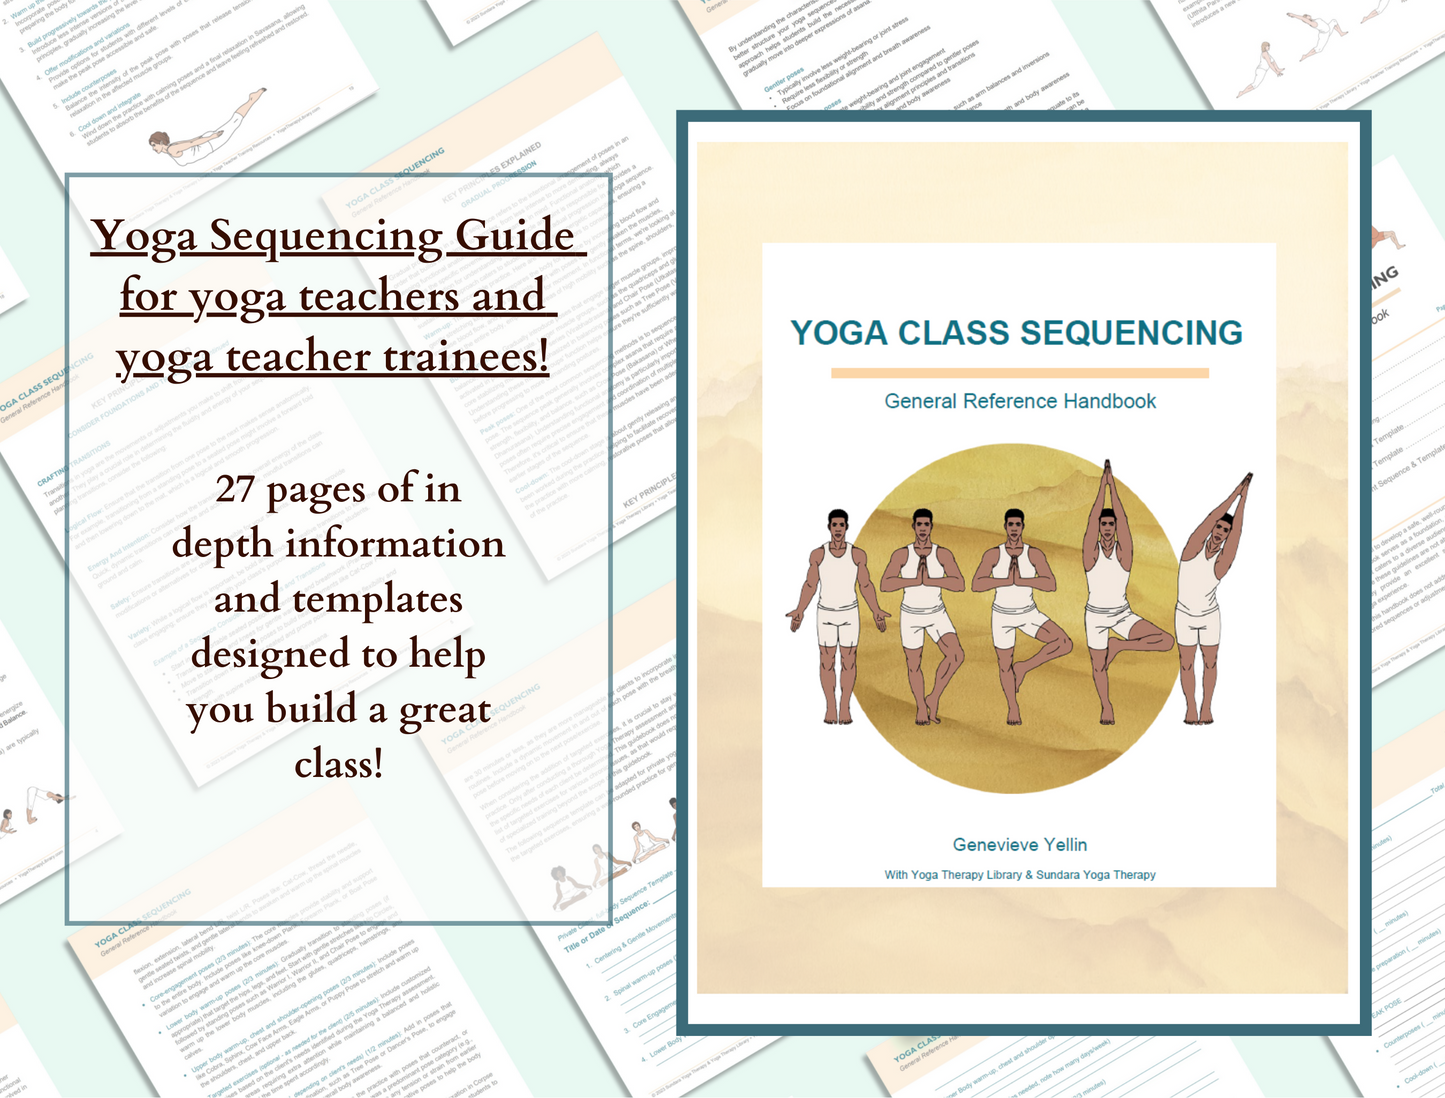 Yoga Class Sequencing: A General Reference Handbook - Digital Download